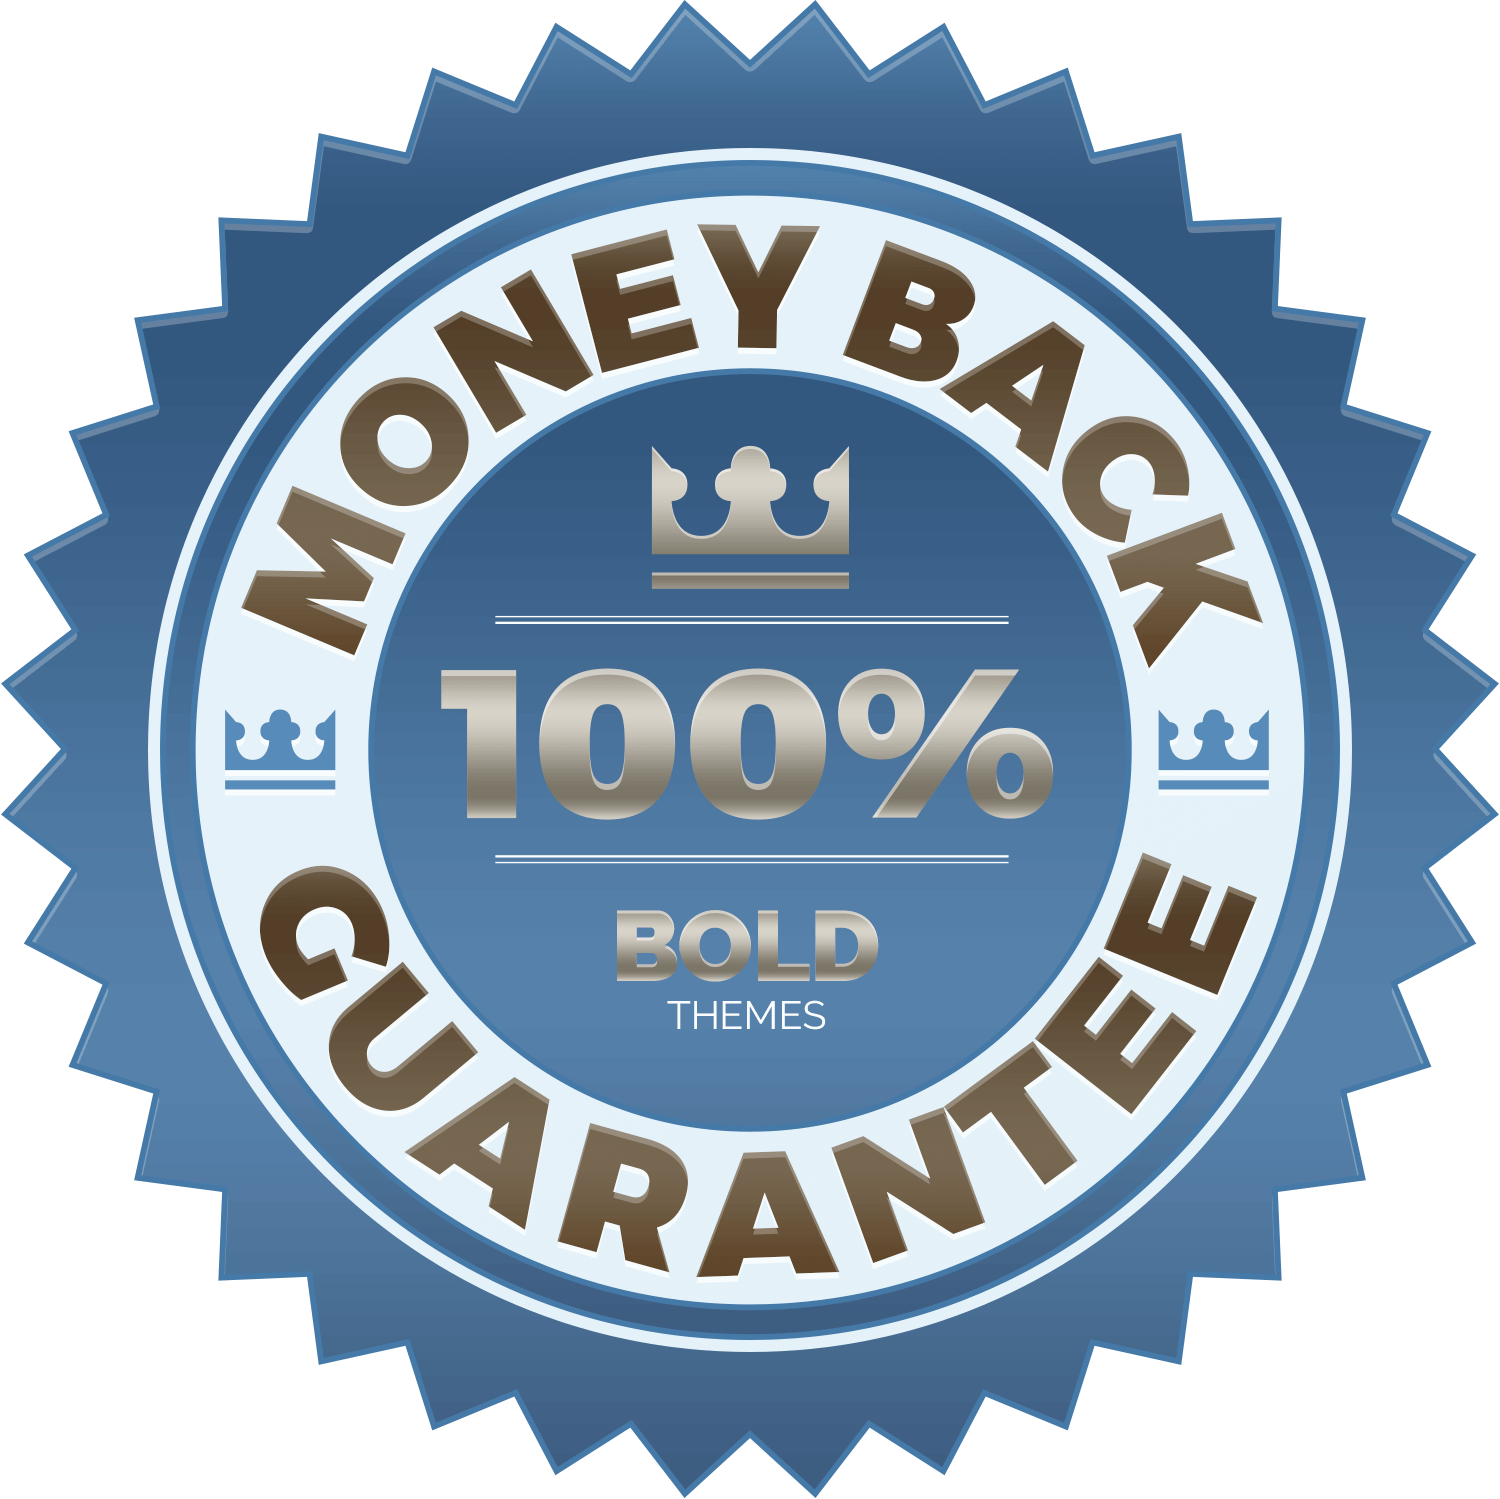 https://www.pocketworth.in/wp-content/uploads/2017/05/Money-back-guarantee.png